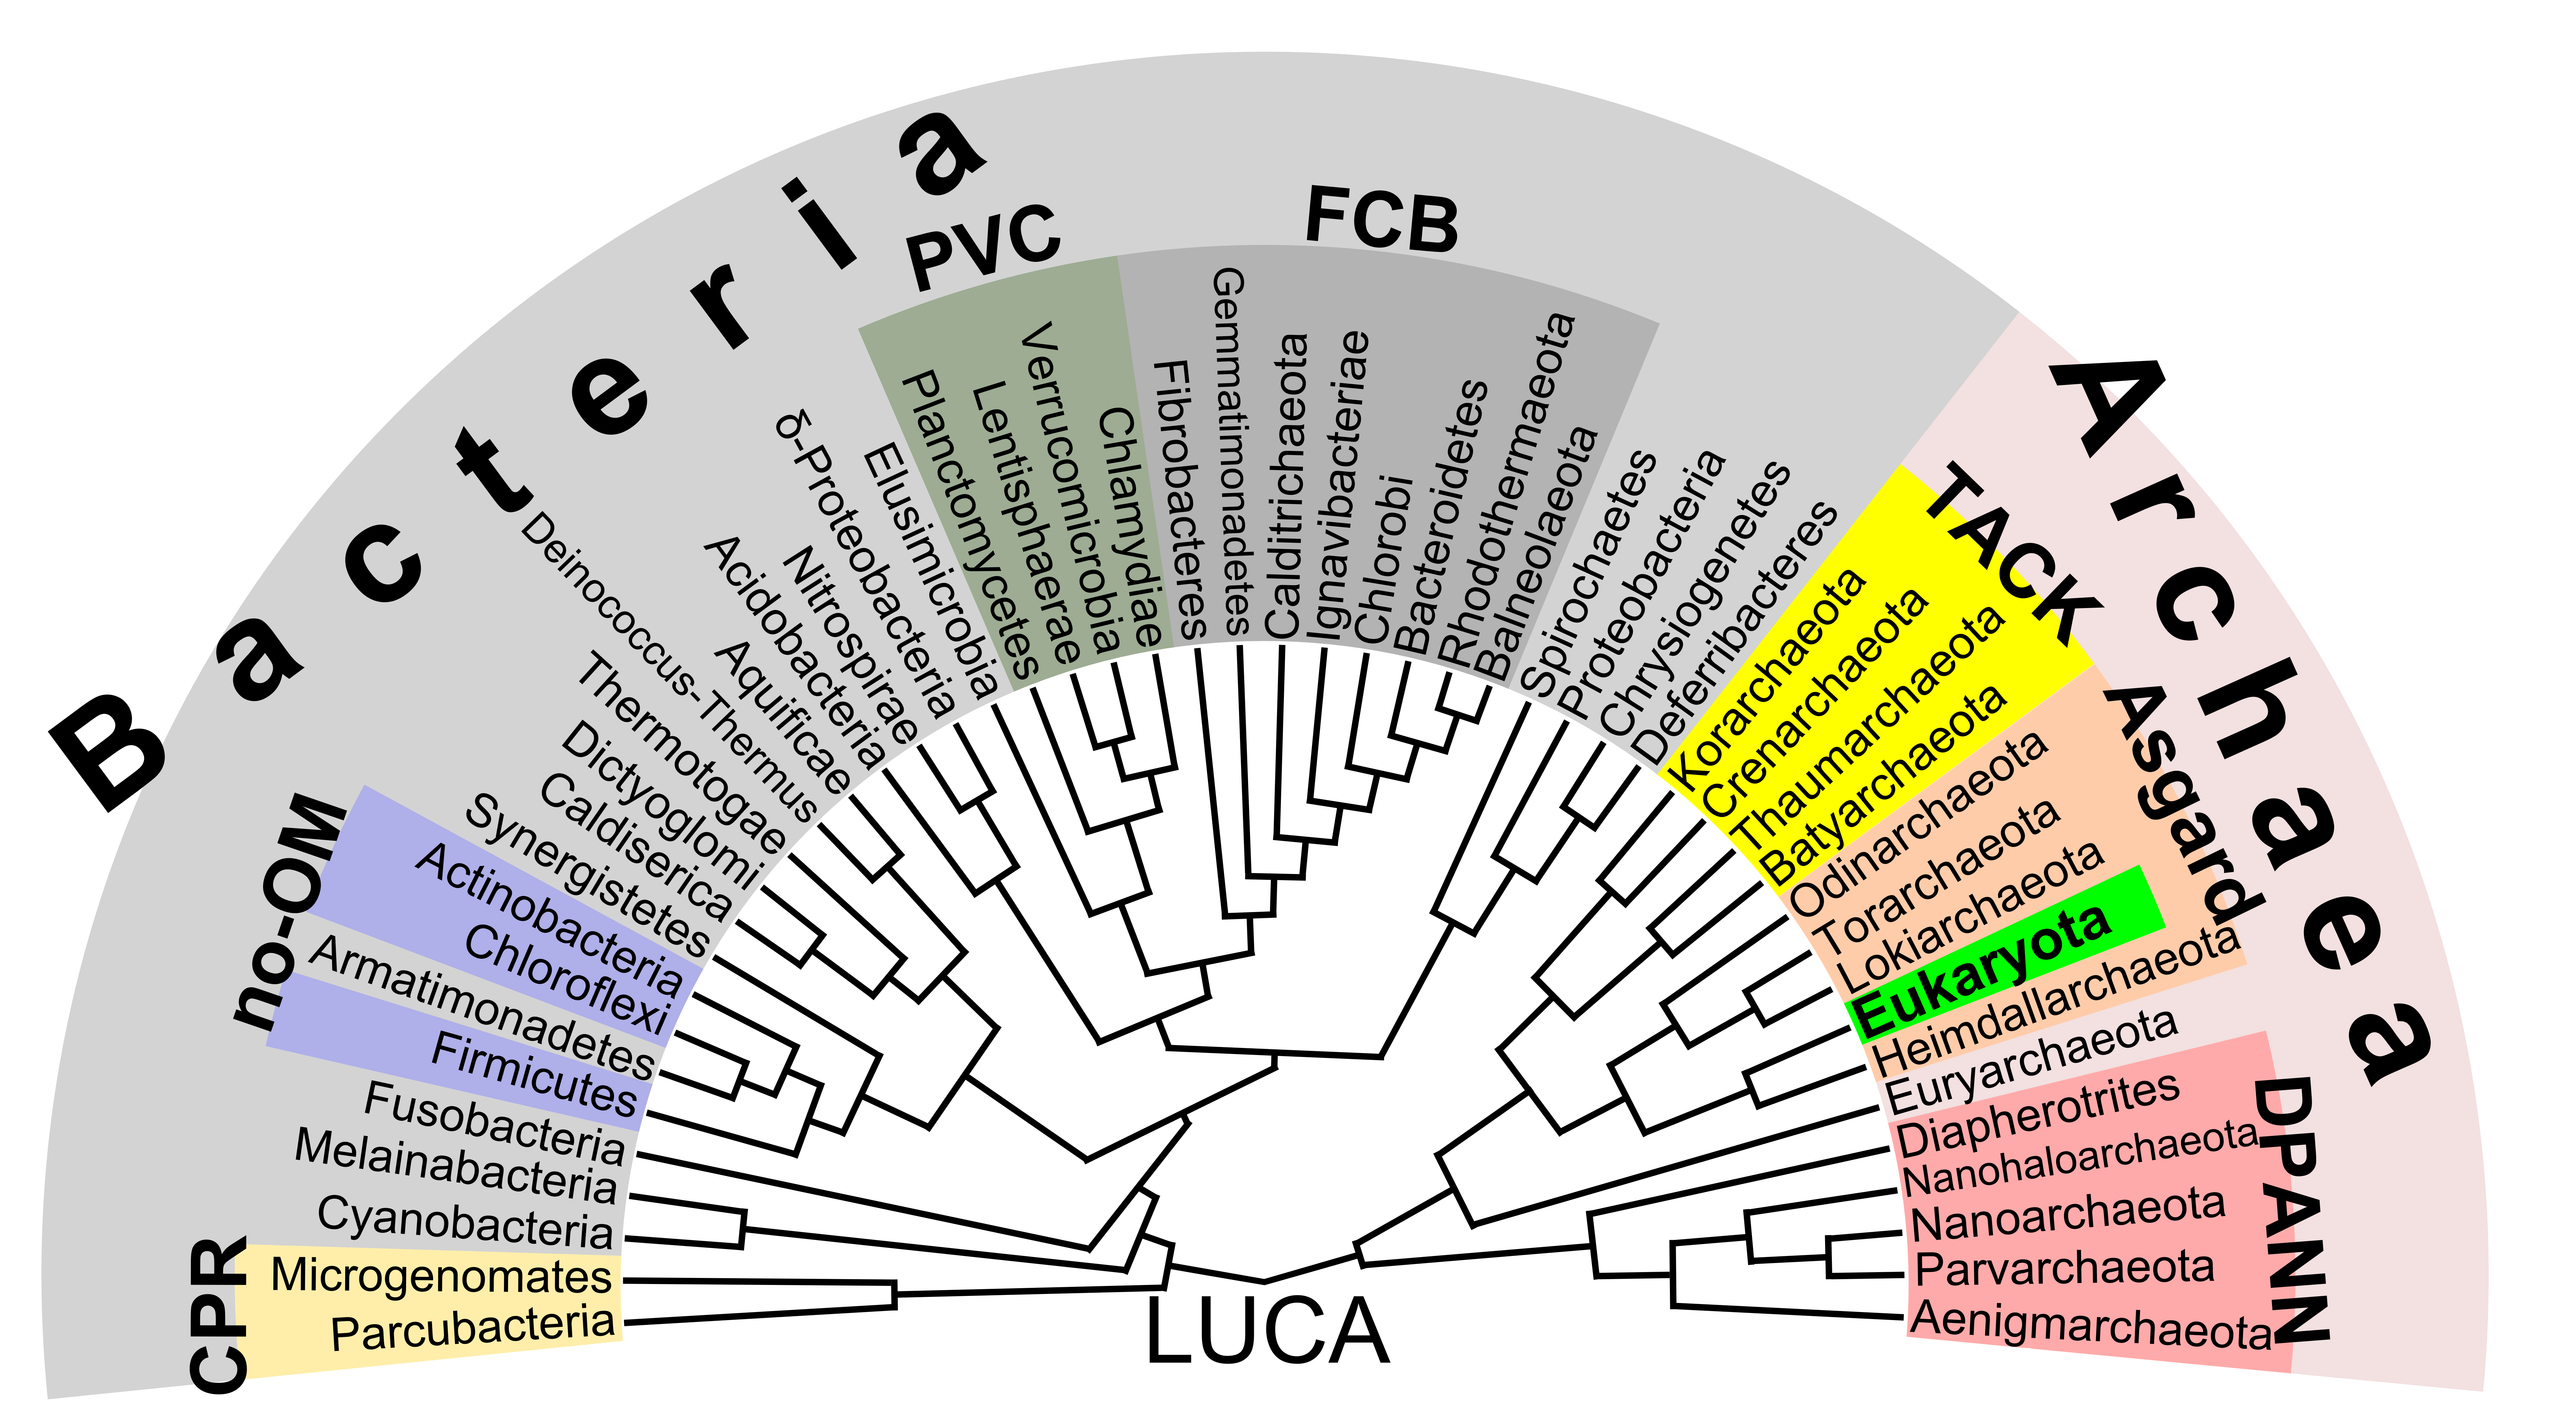 A phylogenetic tree showing major bacterial and archaeal groups. Eukarya is a branch tip within the archaeal clade.